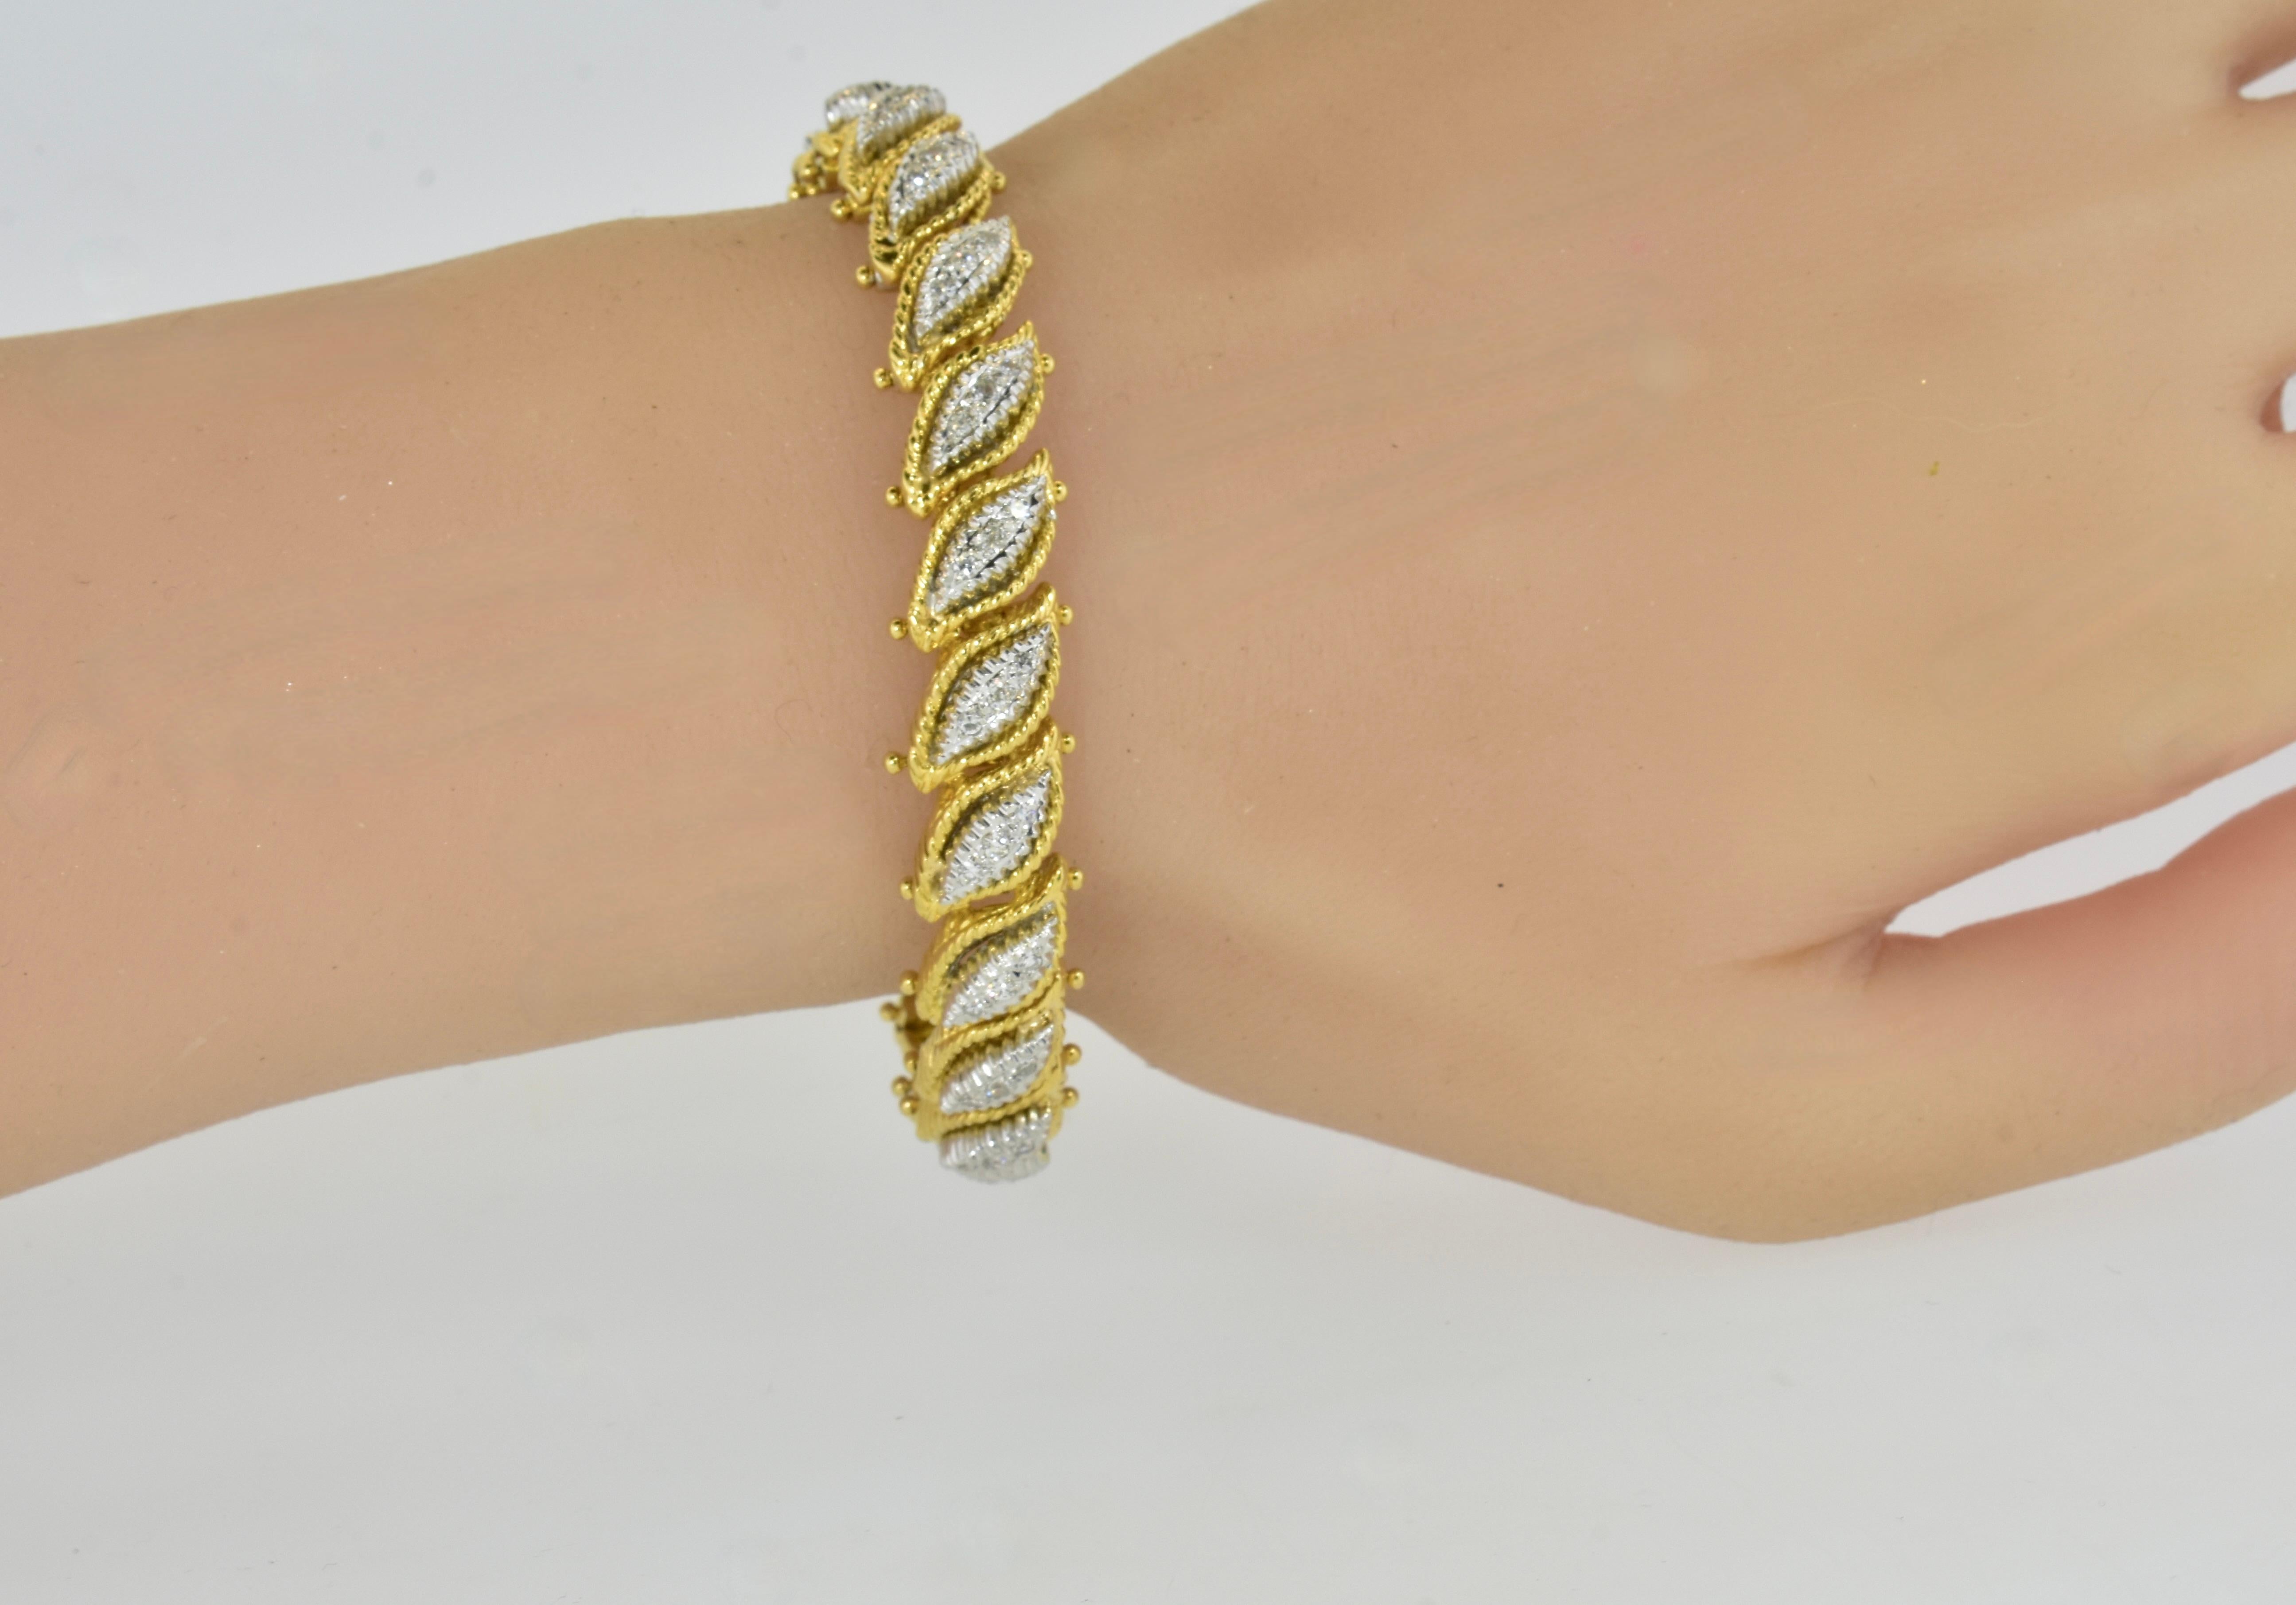 18K yellow and white gold bracelet with diamonds.  This elegant bracelet is hand made, weighs 48.9 grams or 31.44 dwts or 1.57 troy ounces.  There are 21 quite sturdy links which results in a length of 6-7/8ths inches and a width of 3/8th inches. 